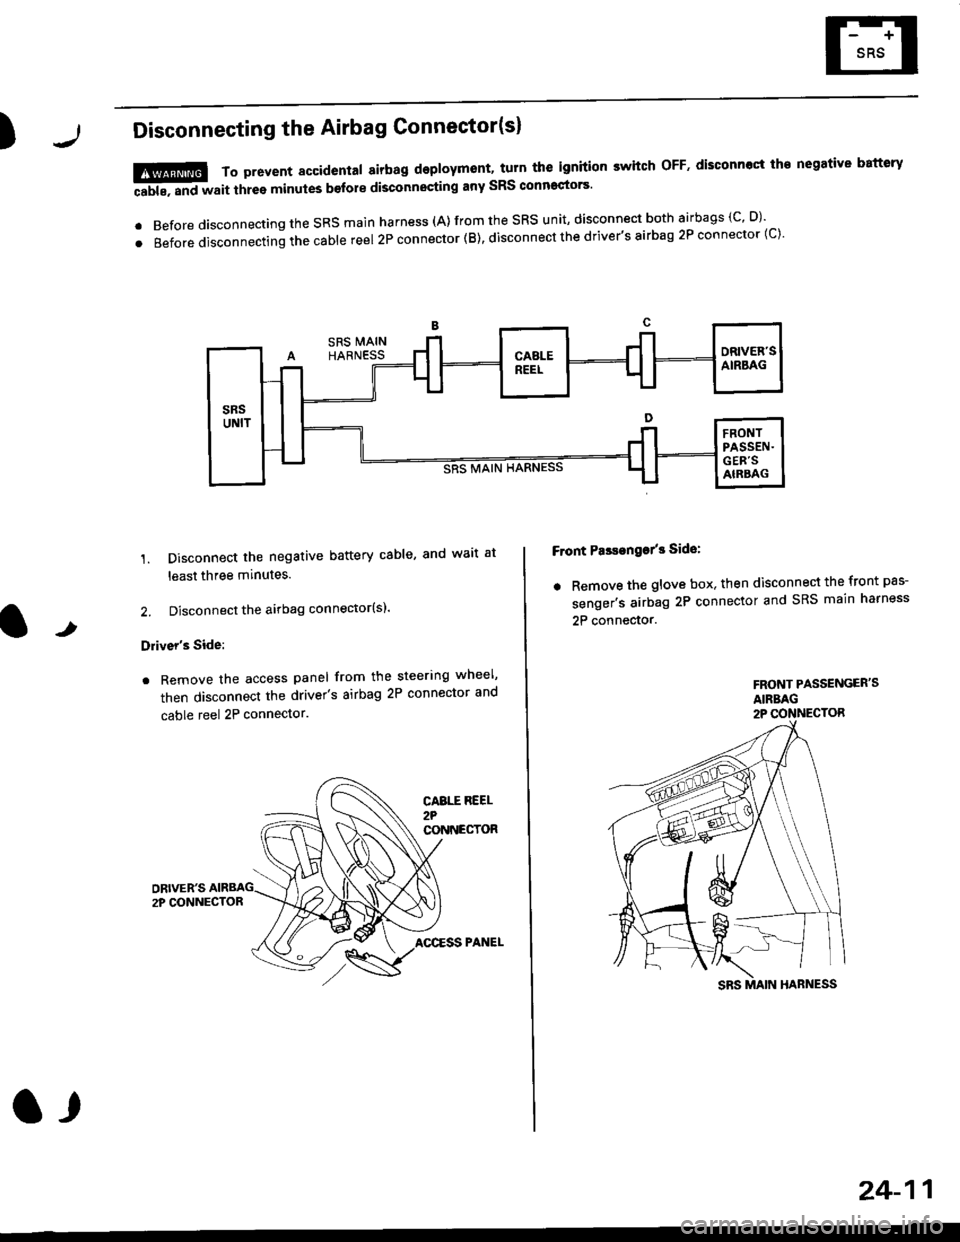 HONDA CIVIC 2000 6.G Workshop Manual )Disconnecting the Airbag Connector(sl
1. Disconnect the negative battery cable, and wait at
least three minutes.
2. Disconnect the airbag connector(sl.
Drivers Side:
. Remove the access panel from 